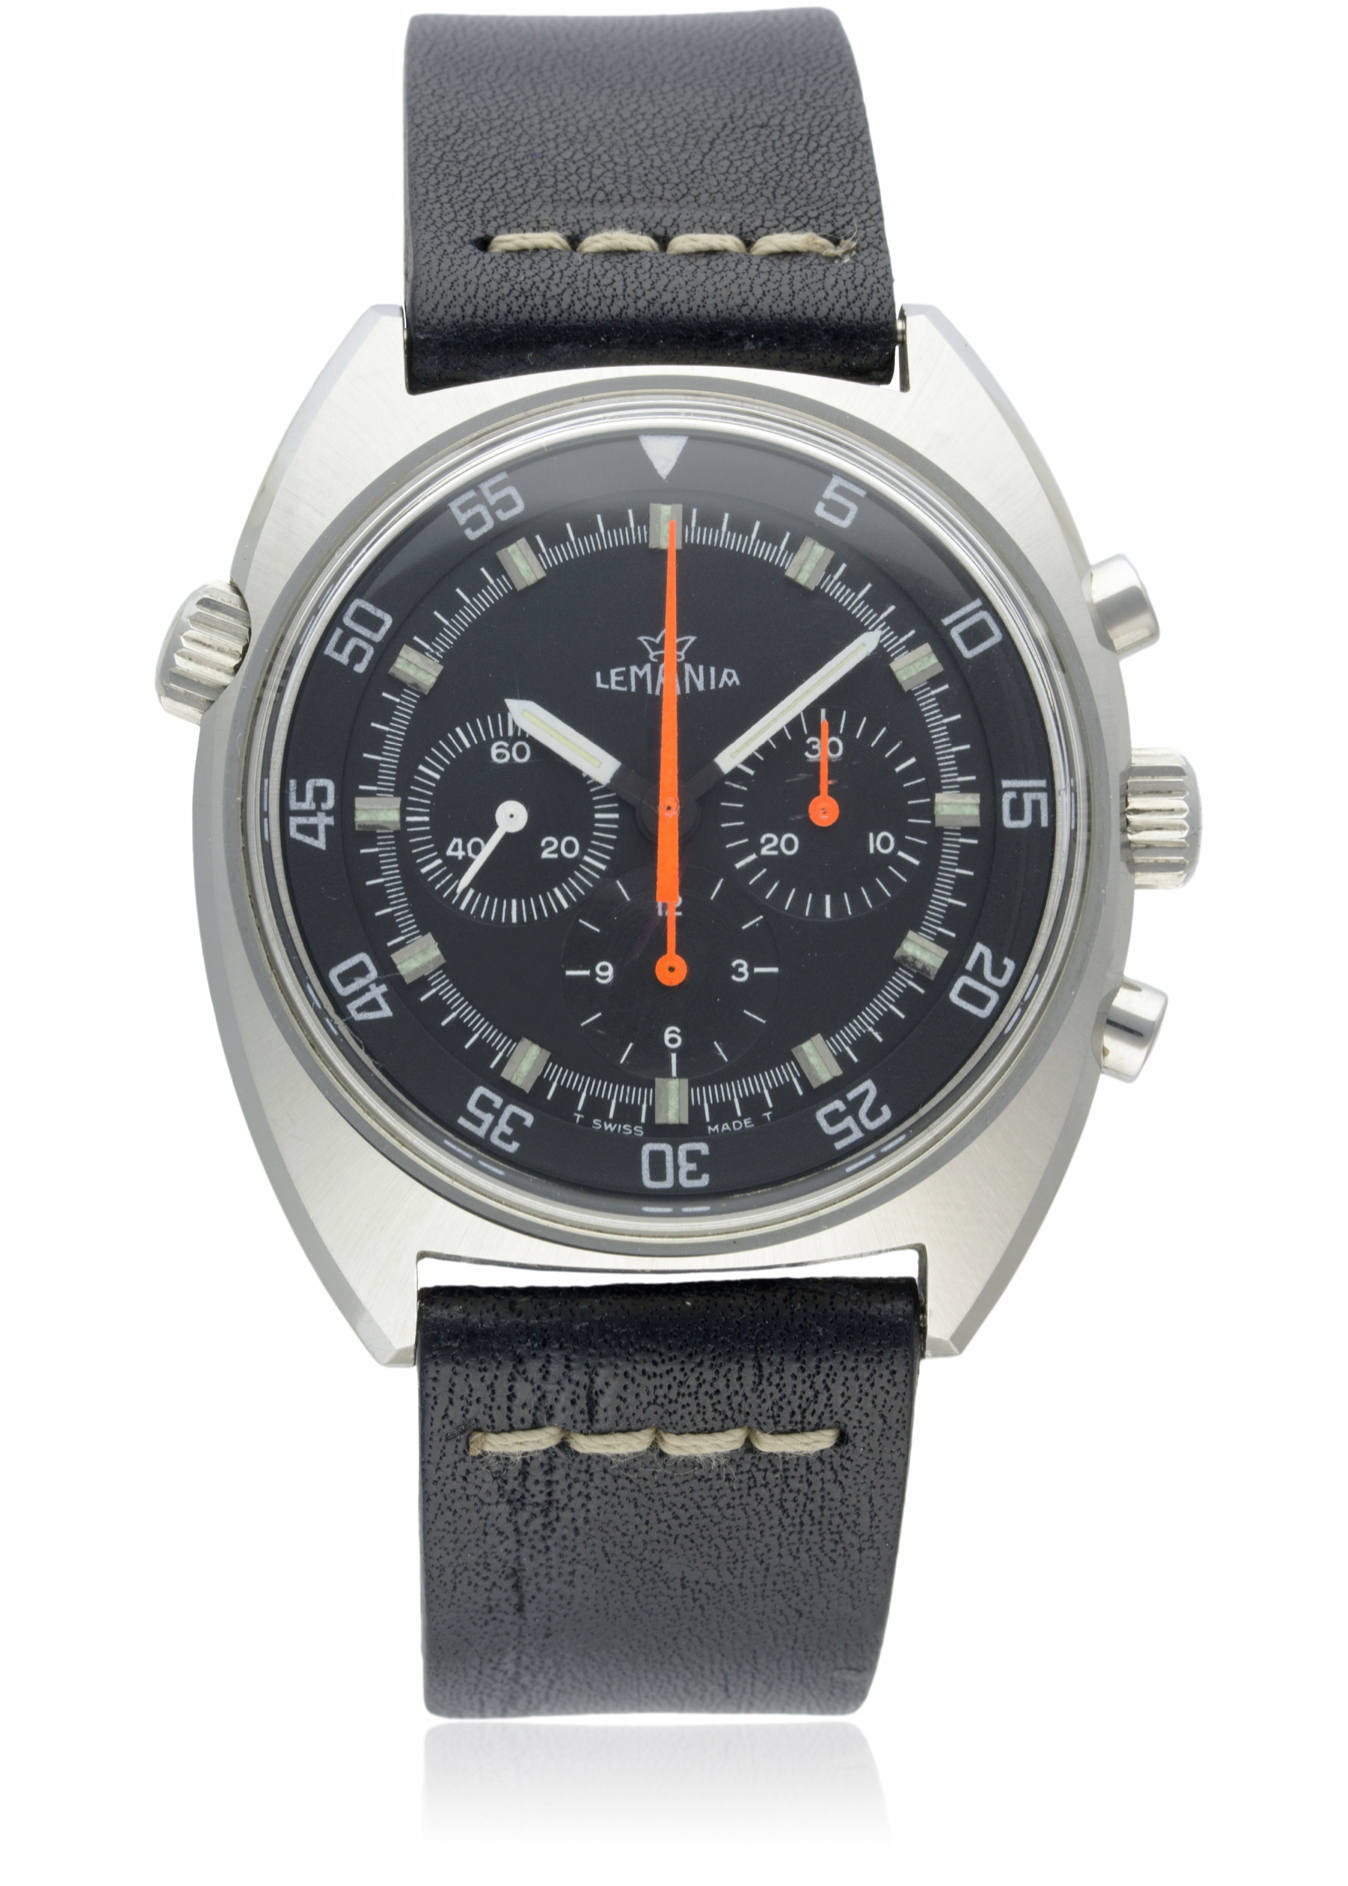 A RARE GENTLEMAN'S STAINLESS STEEL LEMANIA DIVERS CHRONOGRAPH WRIST WATCH CIRCA 1970s, REF. 9658 - Image 2 of 9